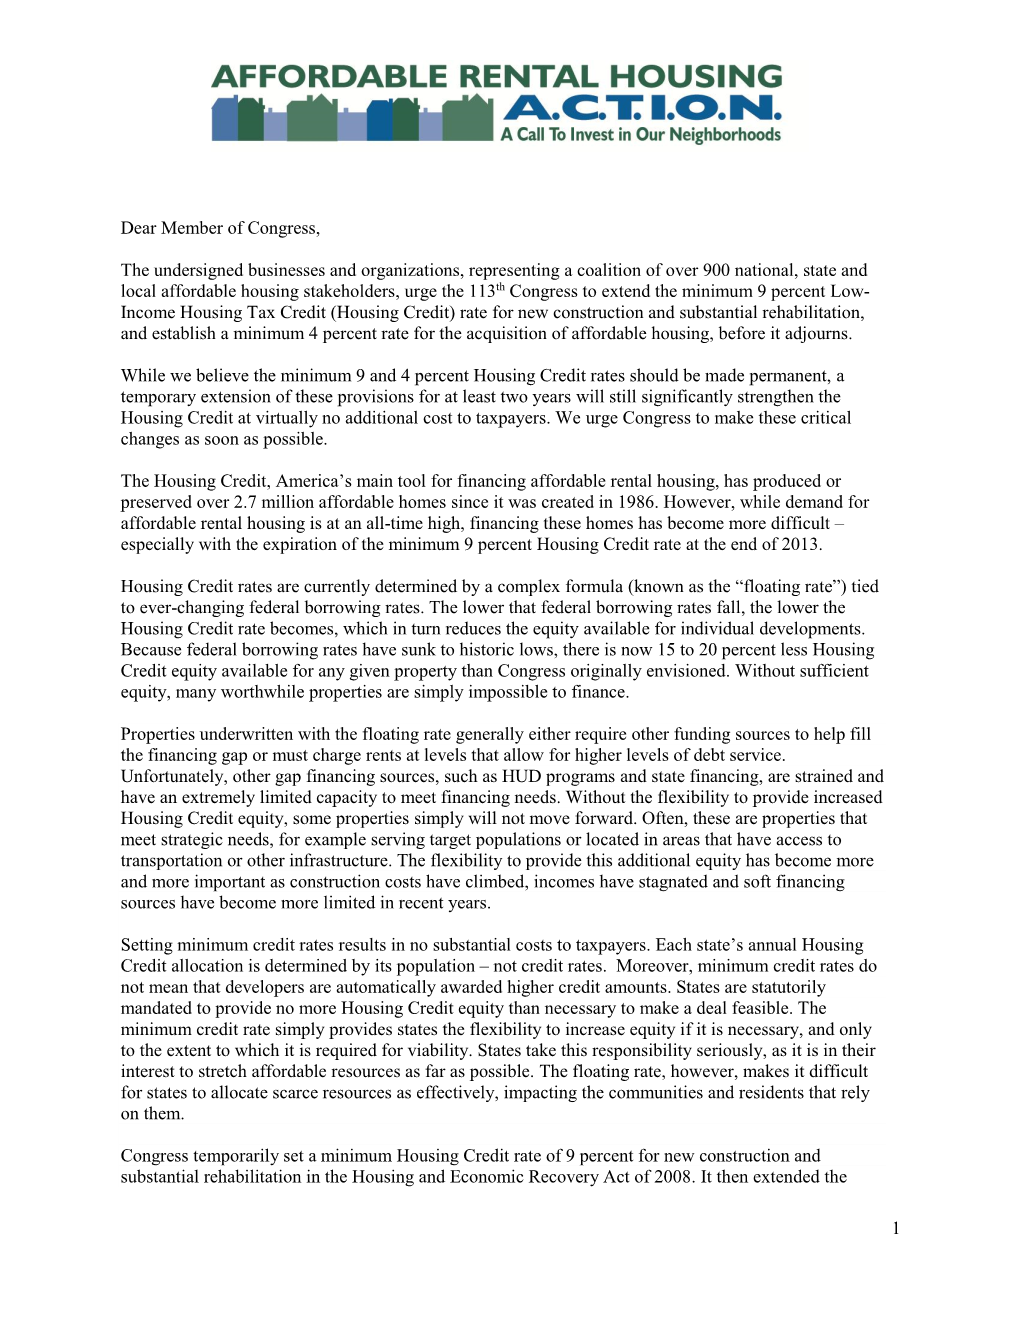 ACTION Tax Extenders Letter Supporting the LIHTC Program